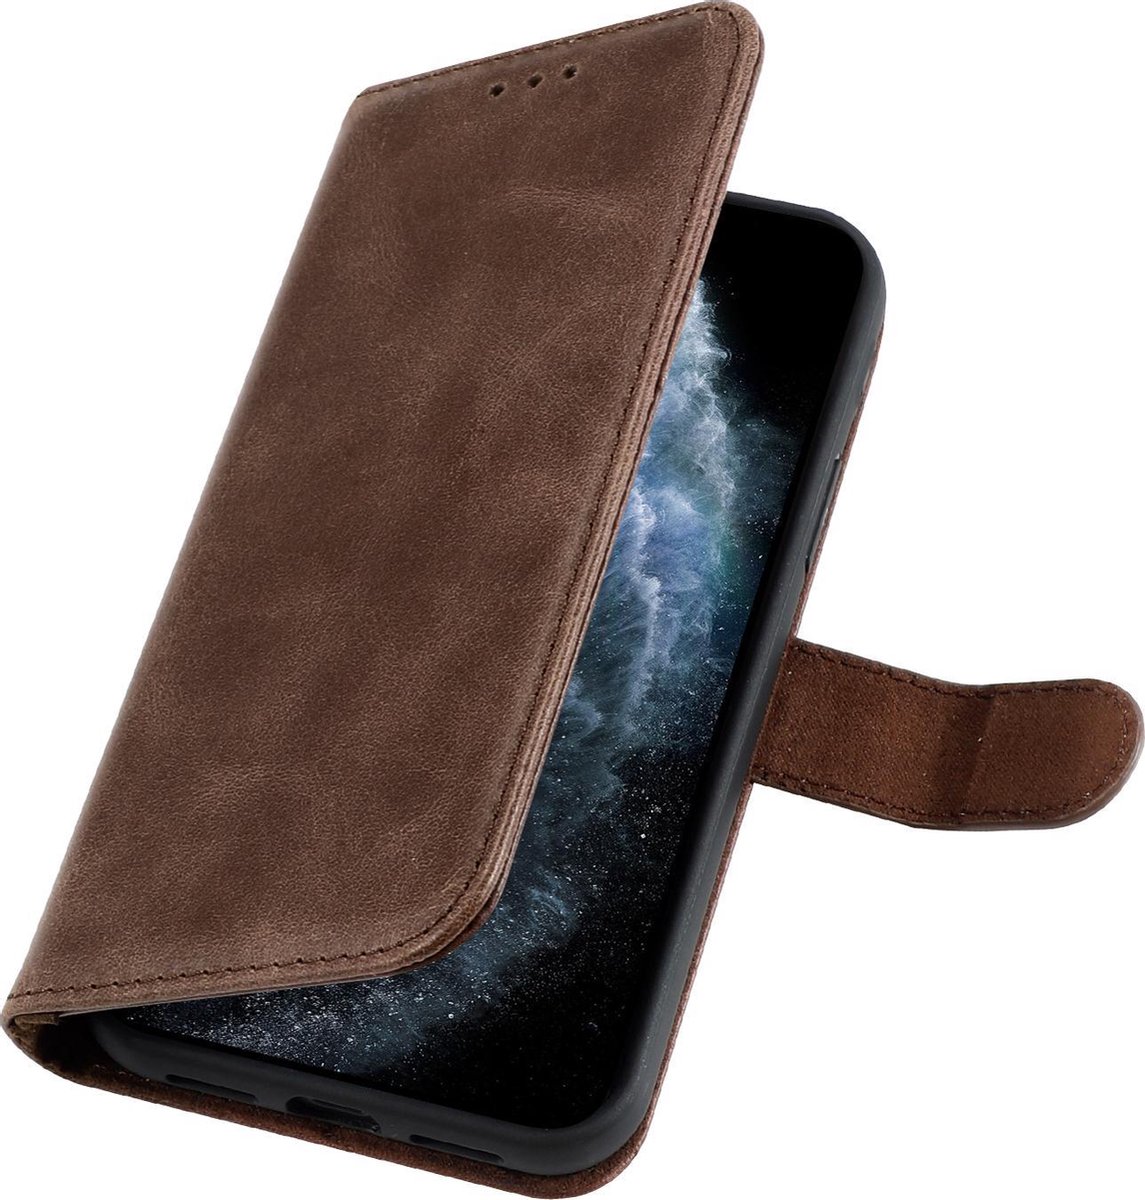 DiLedro - iPhone 12 Pro Max hoesje bookcase - iPhone 12 Pro Max wallet case - hoesje iPhone 12 Pro Max bookcase - echt Leer - iPhone 12 Pro Max Echt Lederen Bookcase RFID - Mocca Bruin